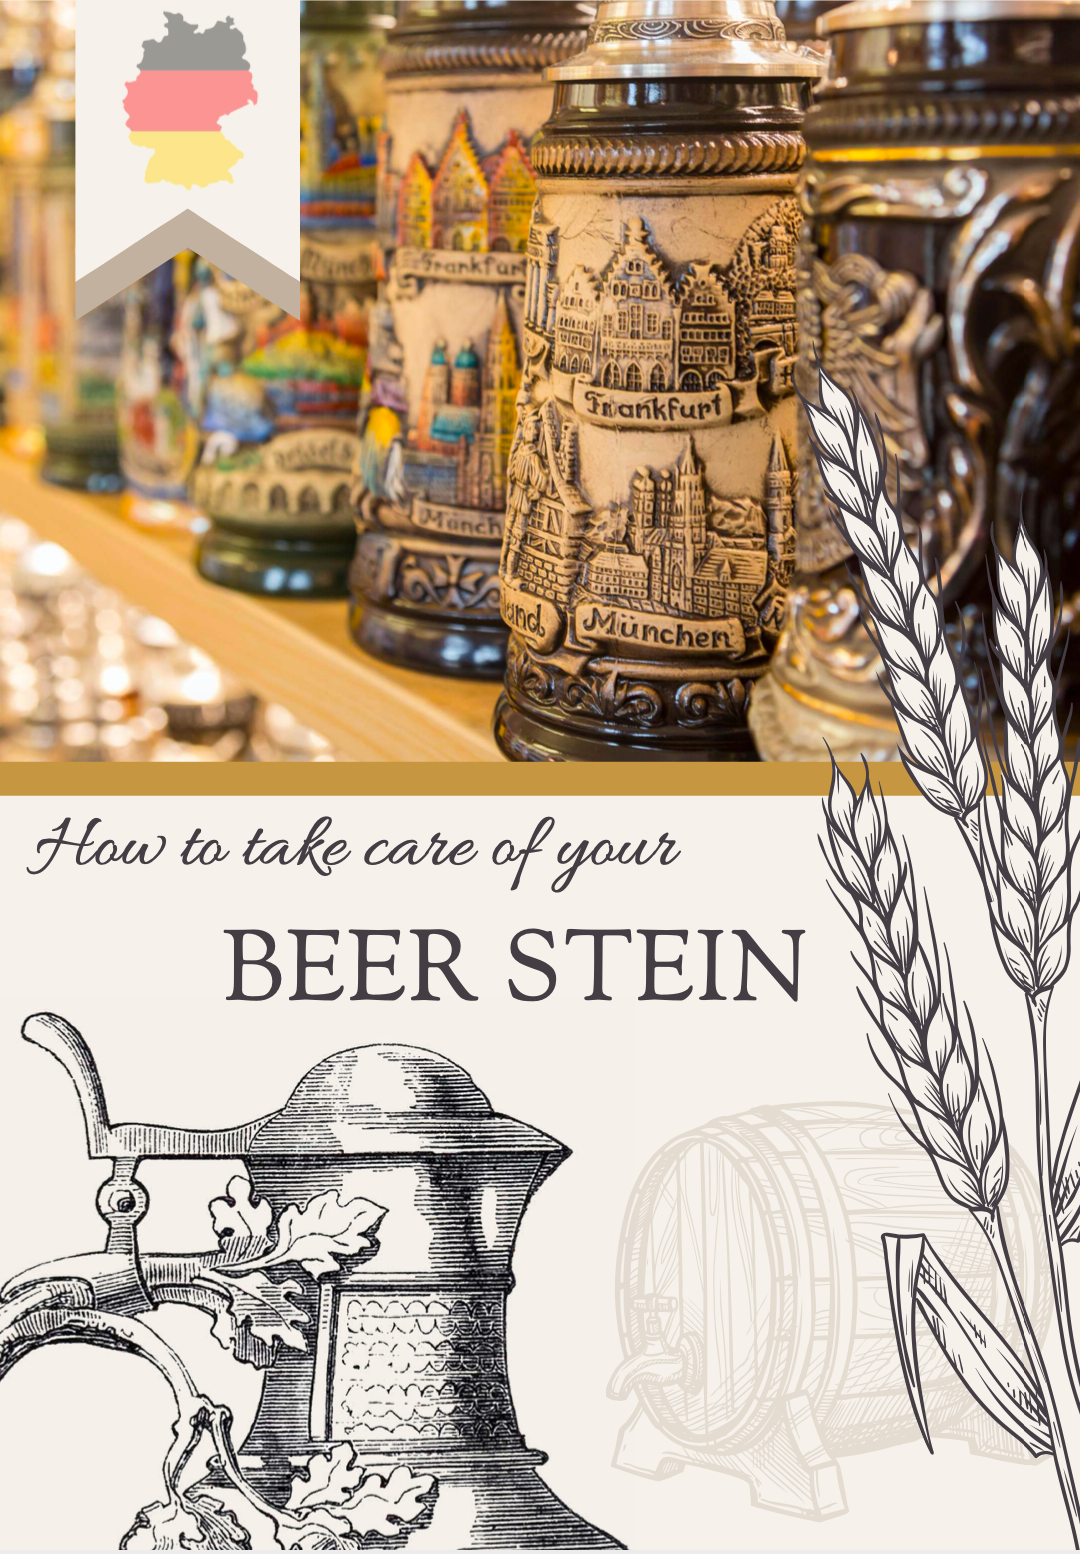 German Beer stein care PDF for download made by The German Village Shop